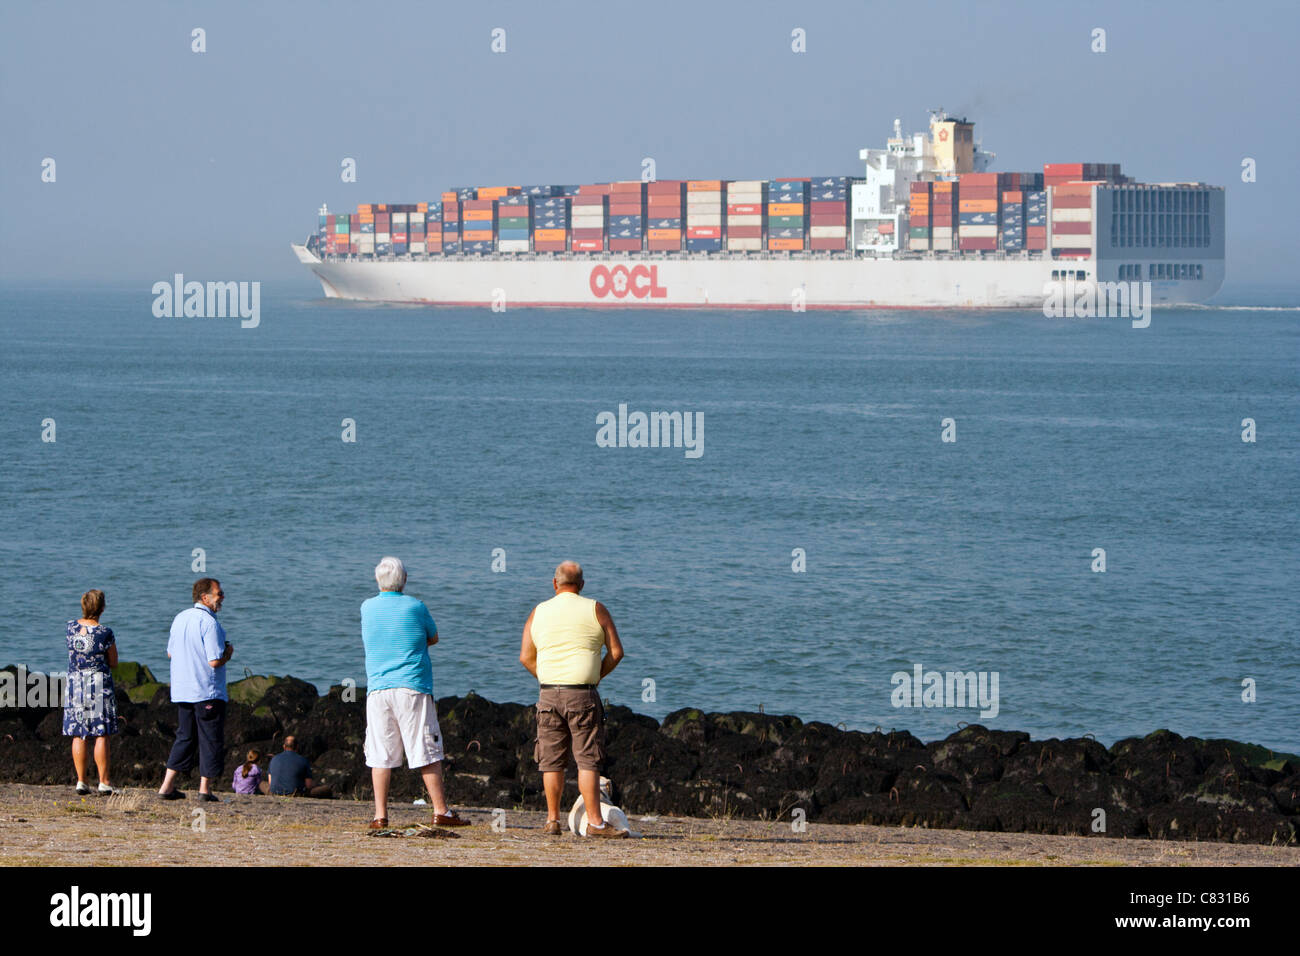 People watching a container ship leaving the port of Rotterdam, The Netherlands Stock Photo